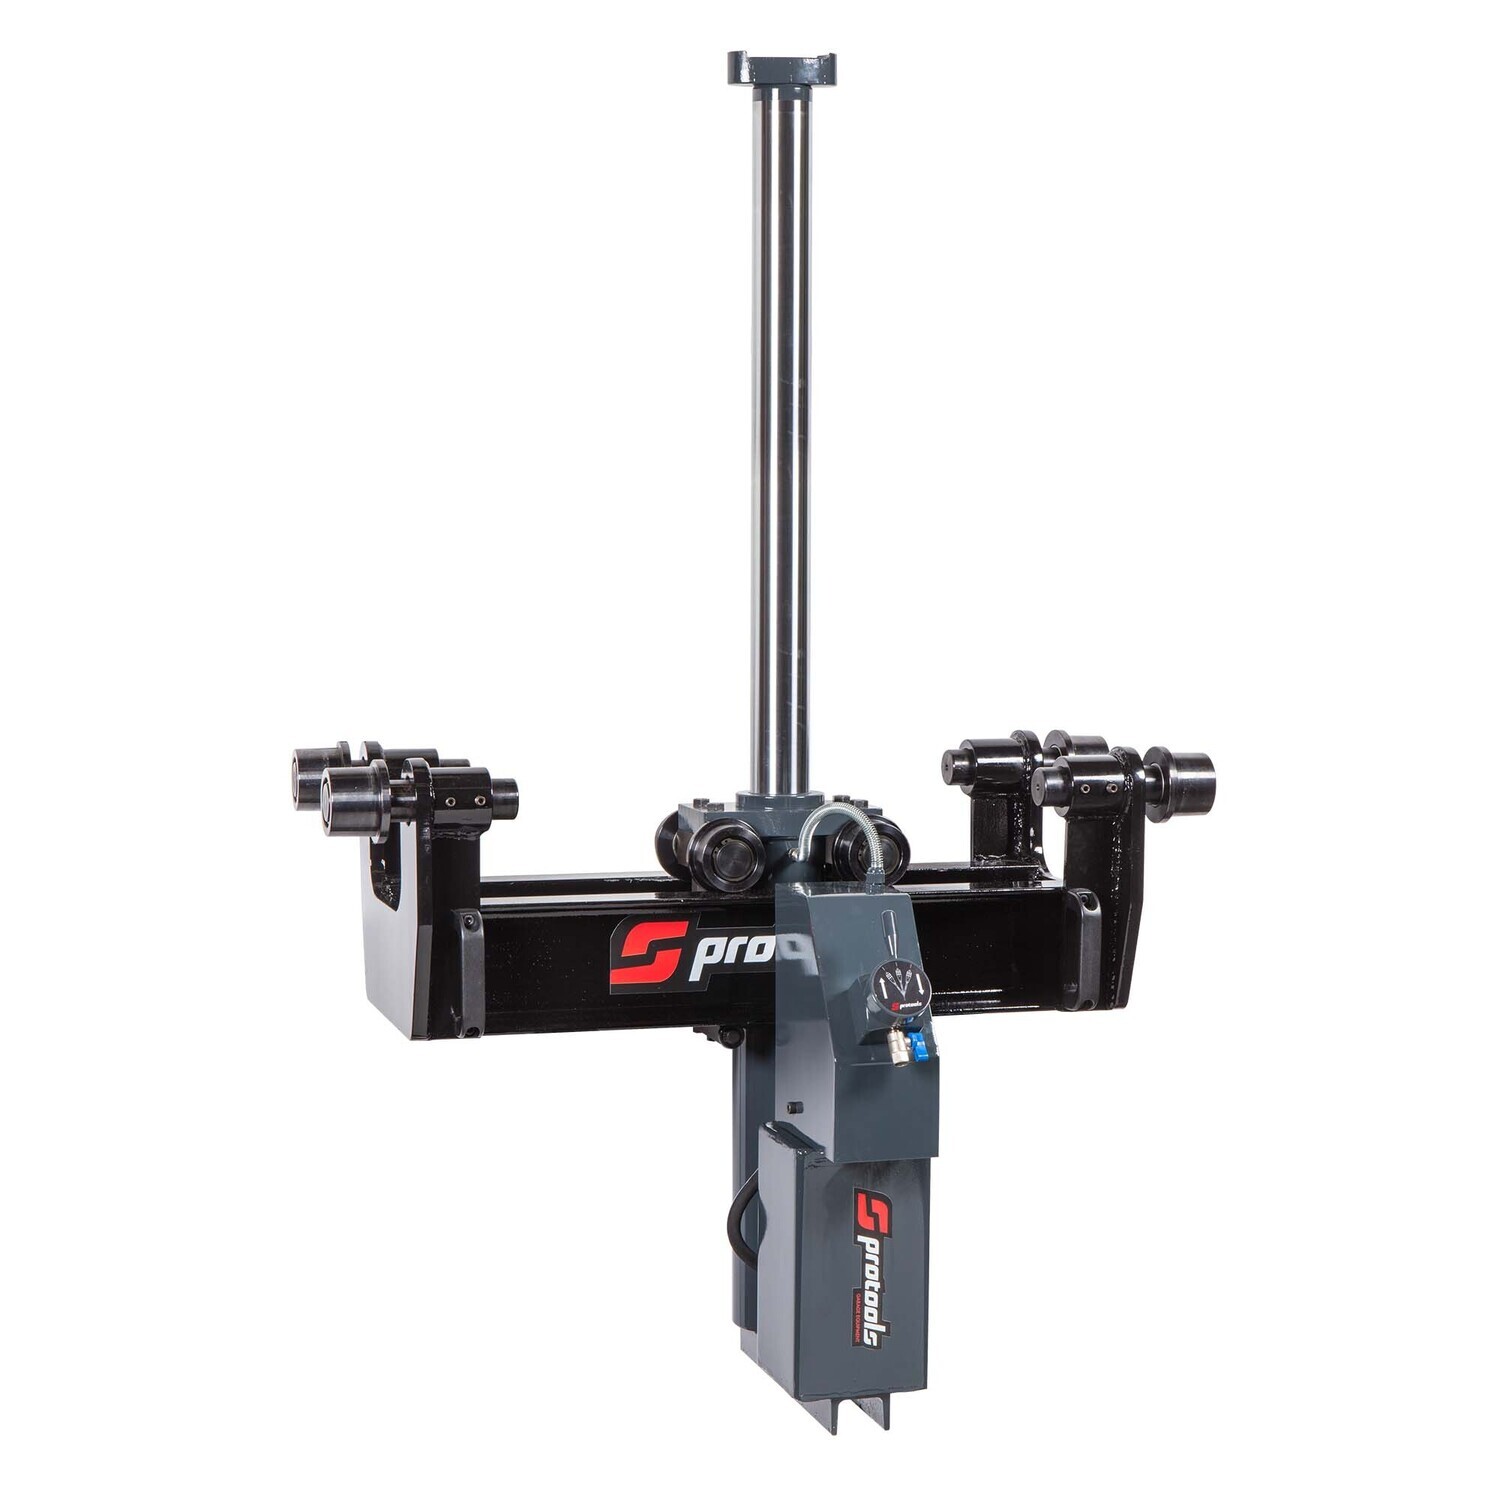 PJB015.975.1 Suspended air-hydraulic pit jack - Capacity 15t